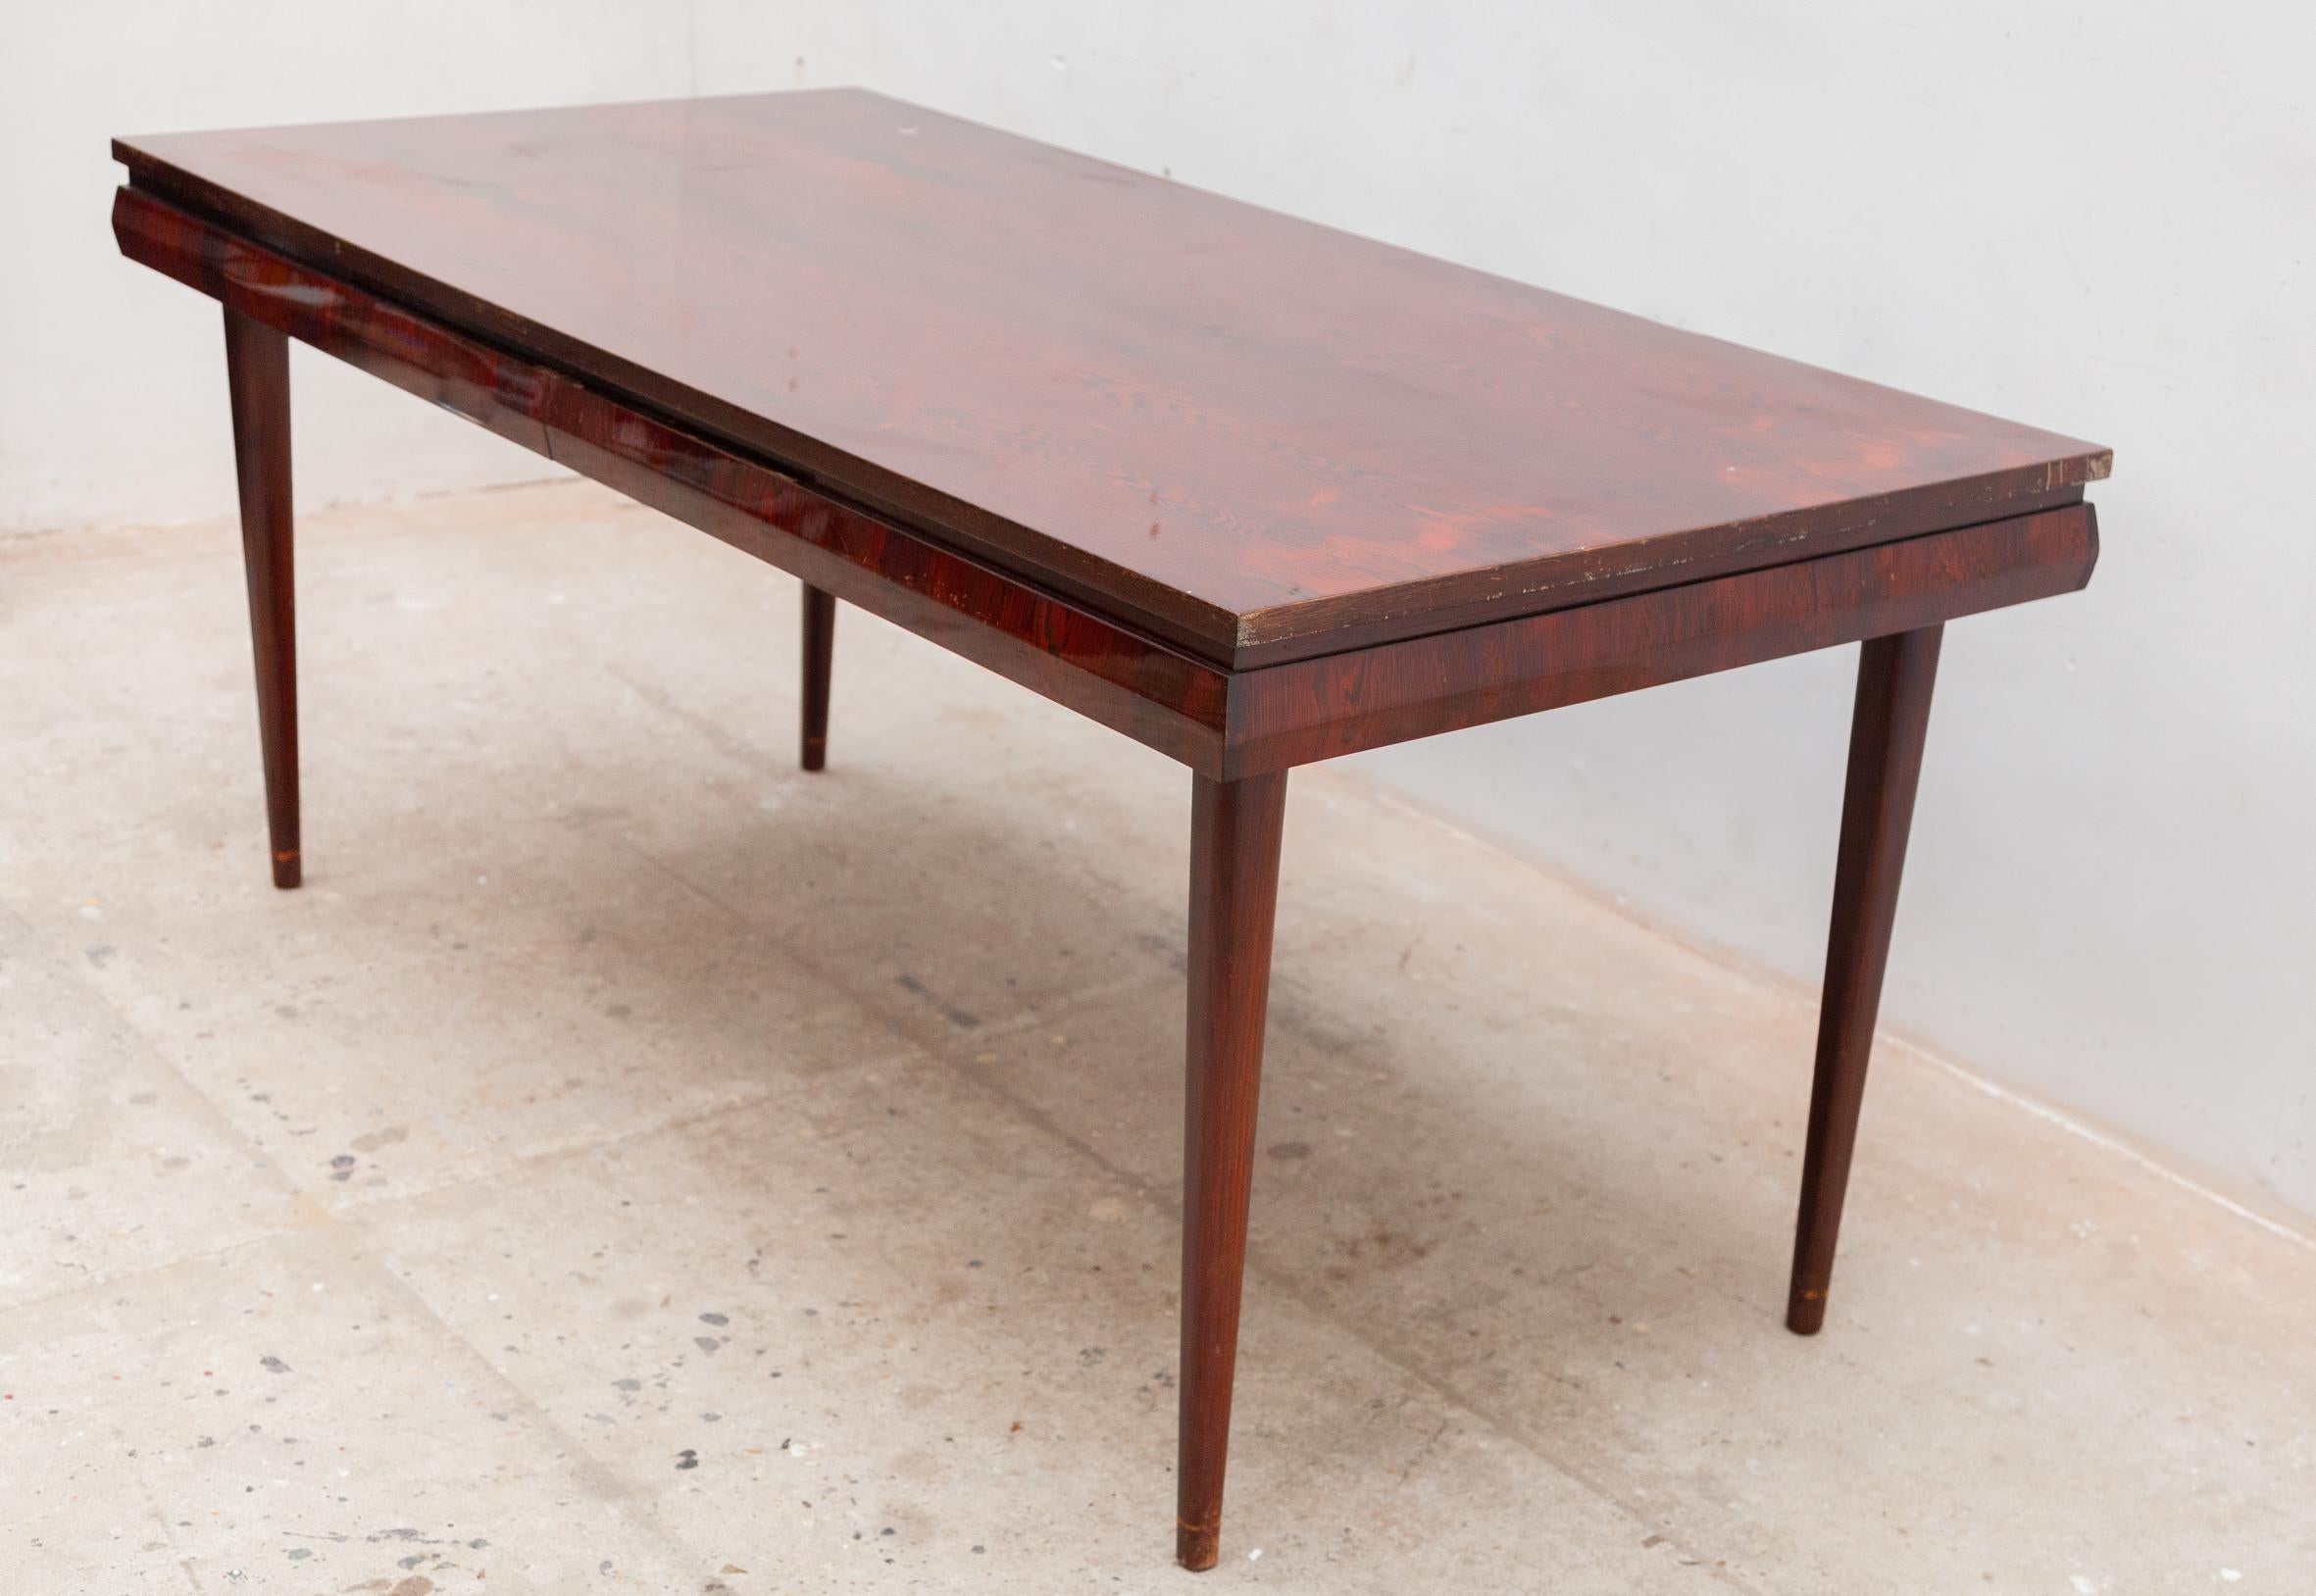 Hand-Crafted Large Extendable Dining Table 1950s, Italy For Sale